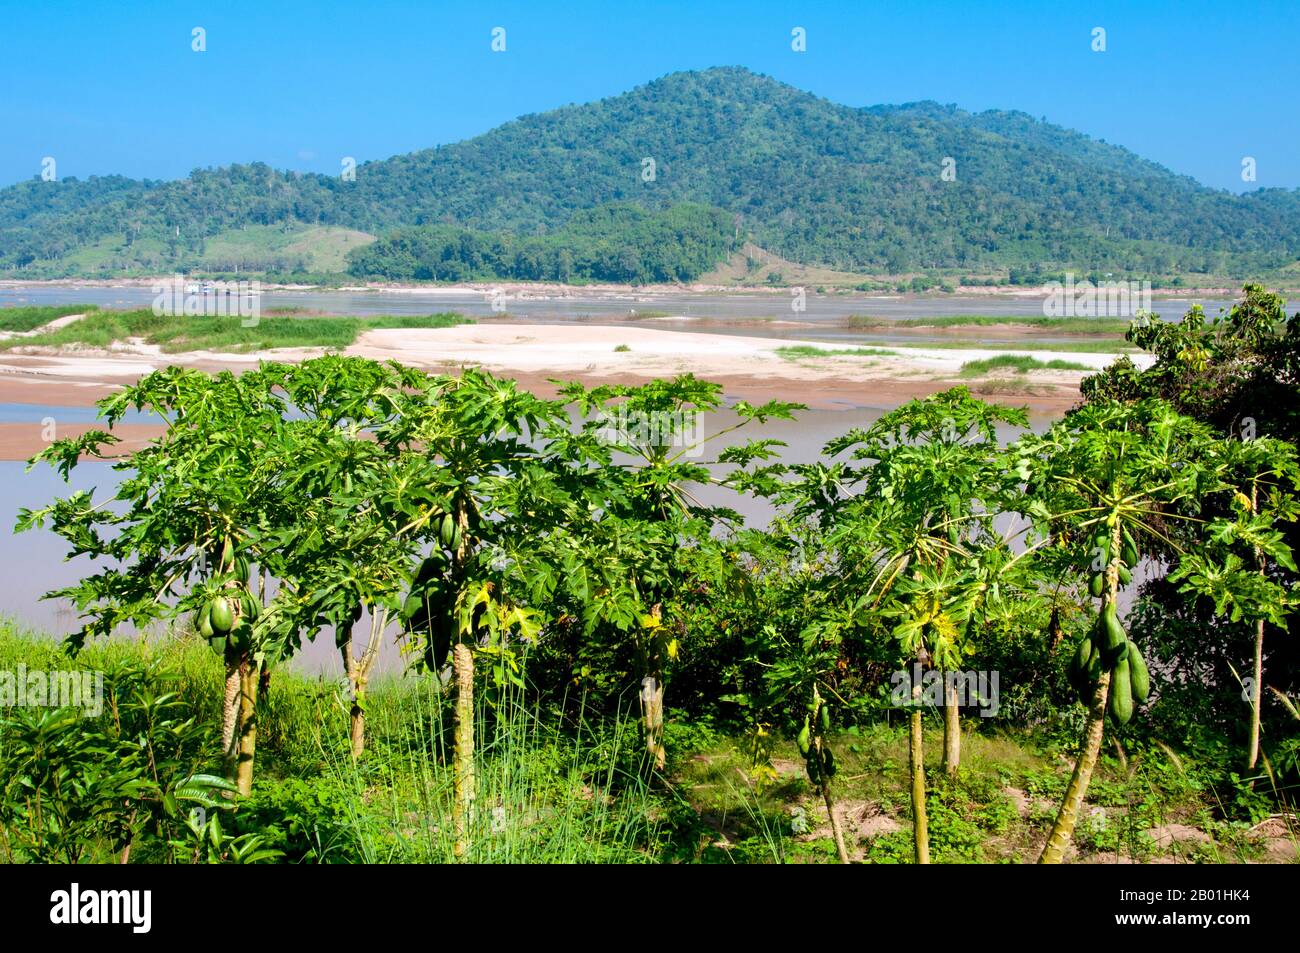 Thailand: A boat passes through the narrows behind a papaya grove at Ban Hat Bia on the Mekong River, Loei Province.  Loei (Thai: เลย) Province is located in Thailand's upper North-East. Neighboring provinces are (from east clockwise) Nong Khai, Udon Thani, Nongbua Lamphu, Khon Kaen, Phetchabun, Phitsanulok. In the north it borders Xaignabouli and Vientiane Provinces of Laos.  The province is covered with low mountains, while the capital Loei is located in a fertile basin. The Loei River, which flows through the province, is a tributary of the Mekong River. Stock Photo